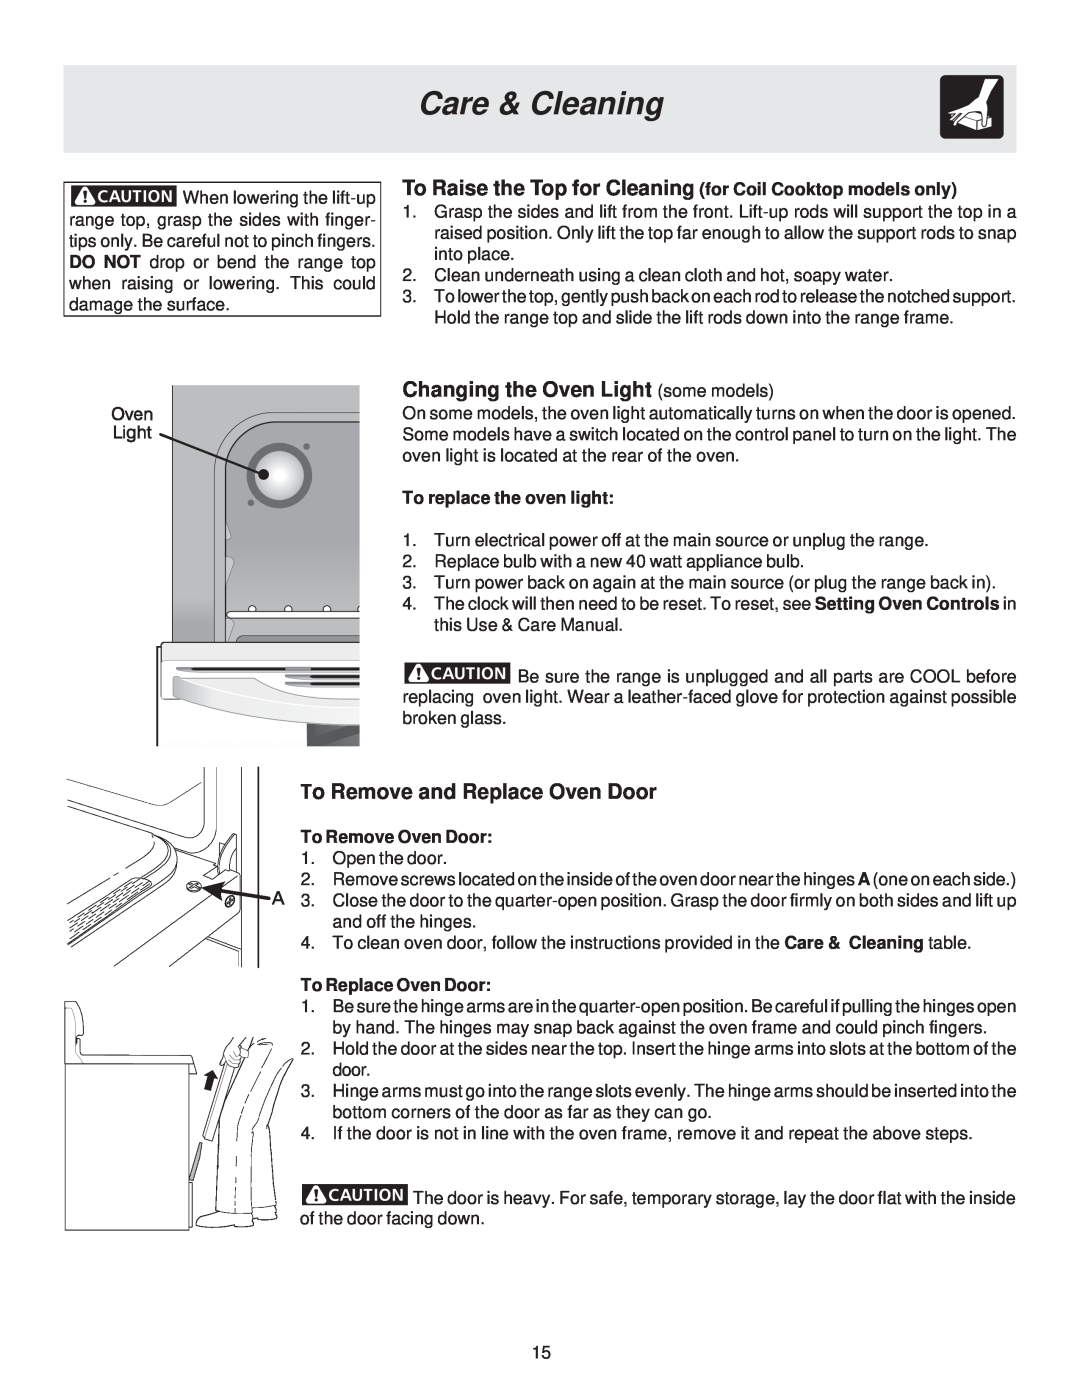 Frigidaire 316257114 manual To Raise the Top for Cleaning for Coil Cooktop models only, Changing the Oven Light some models 